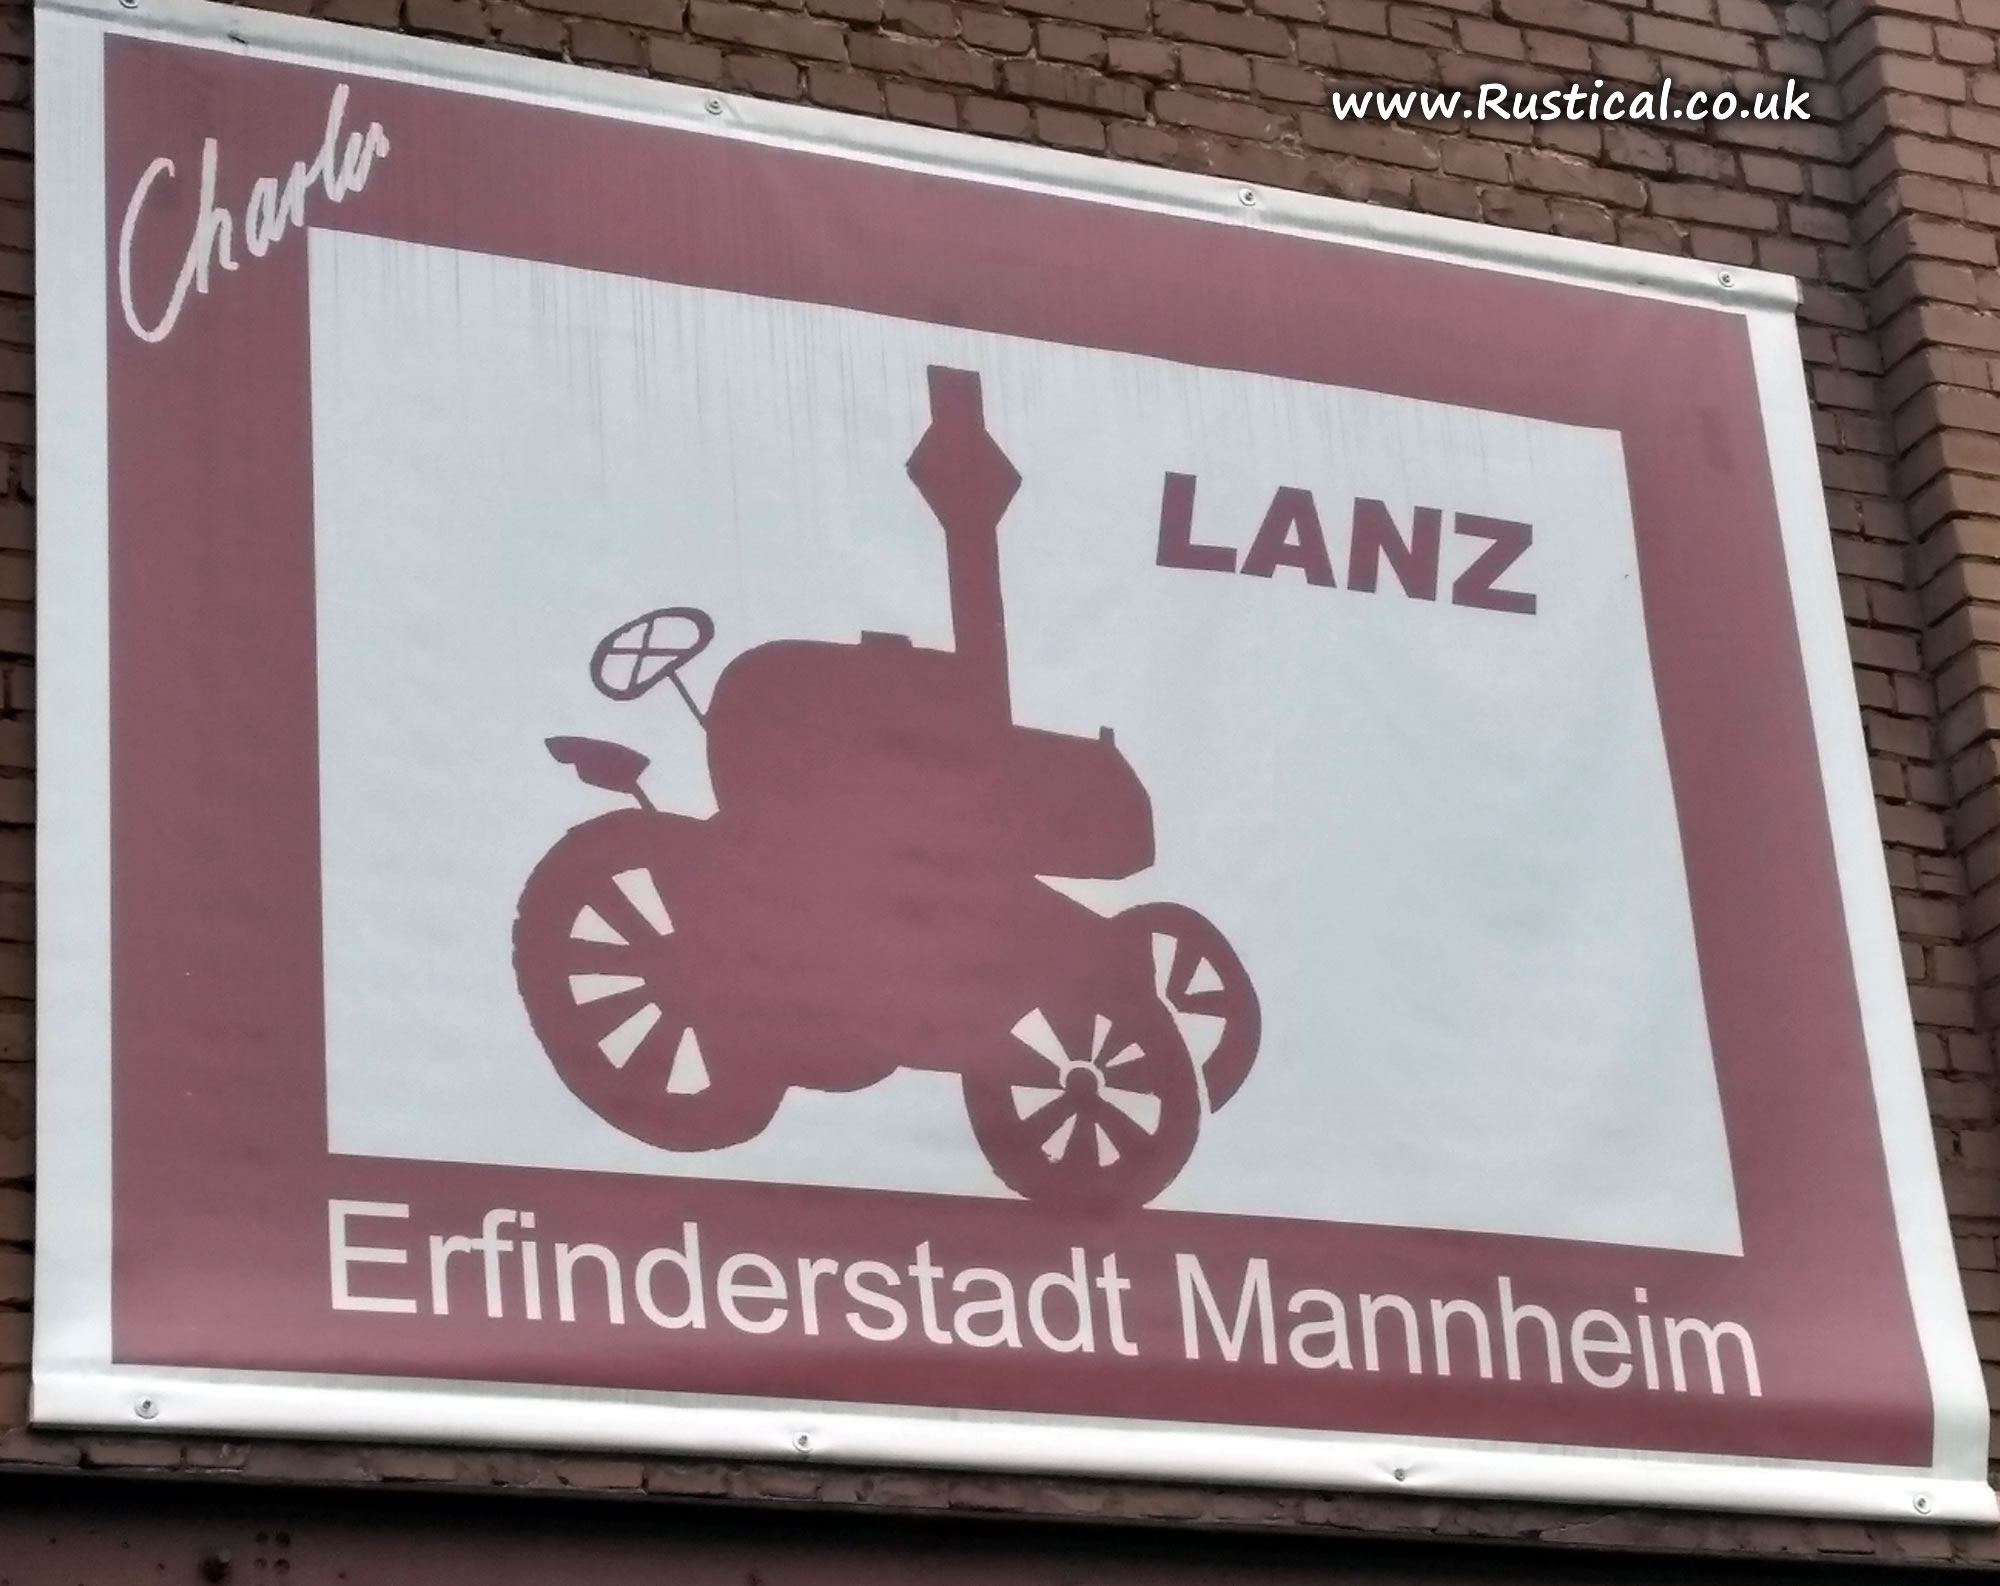 Charles Lanz bulldog tractors were made at the Mannheim site